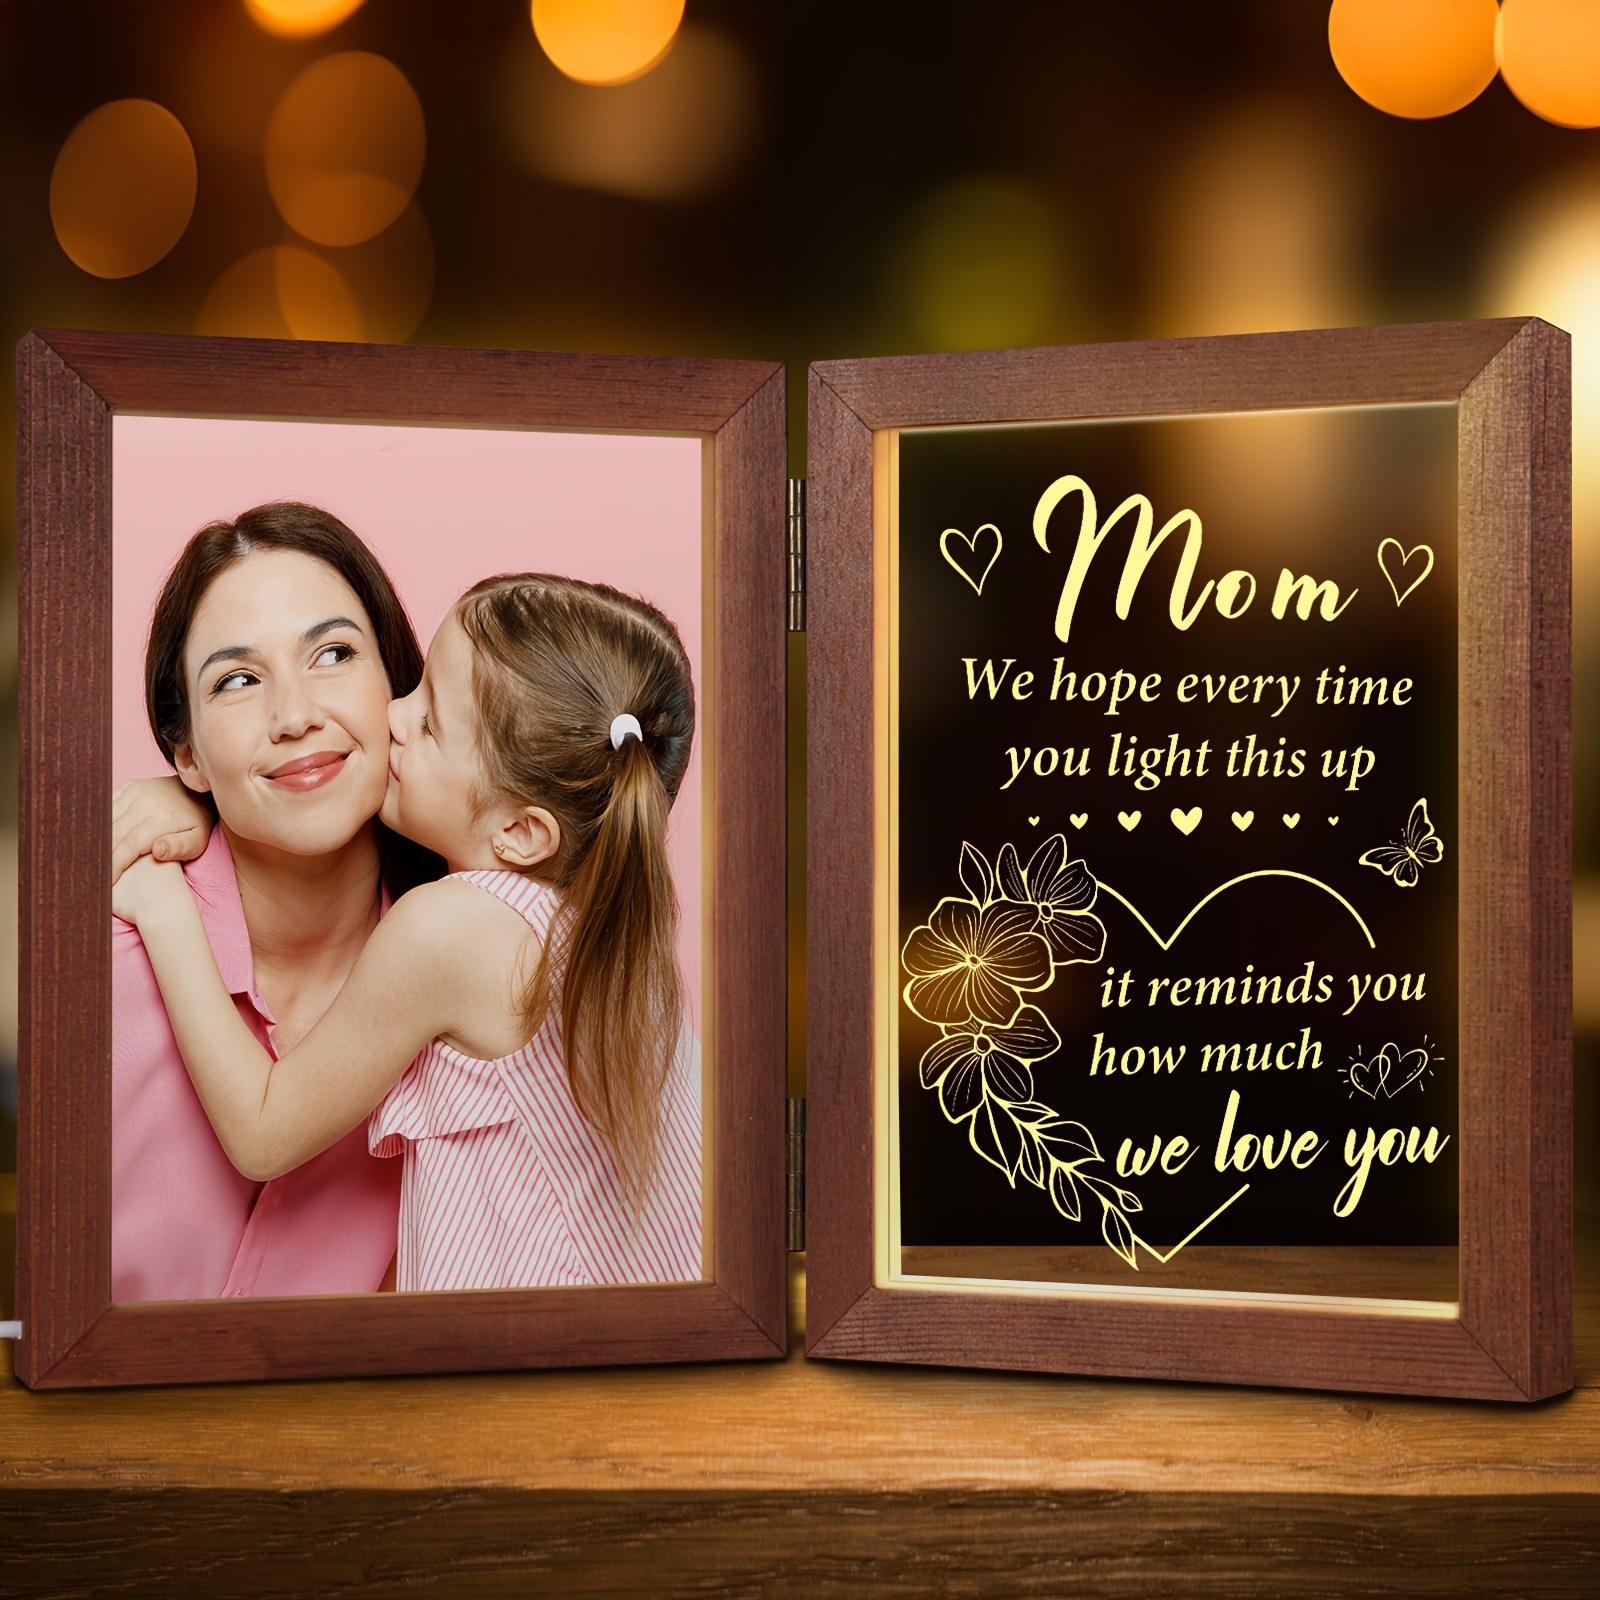 

Mothers Day Gifts For Mom From Daughter Son, Mom Gifts 5x7 Picture Frame With Night Light, Table Night Lamp With Warm Words - Best Mom Ever Gifts First Mother's Day Gifts For New Mom Women Wife